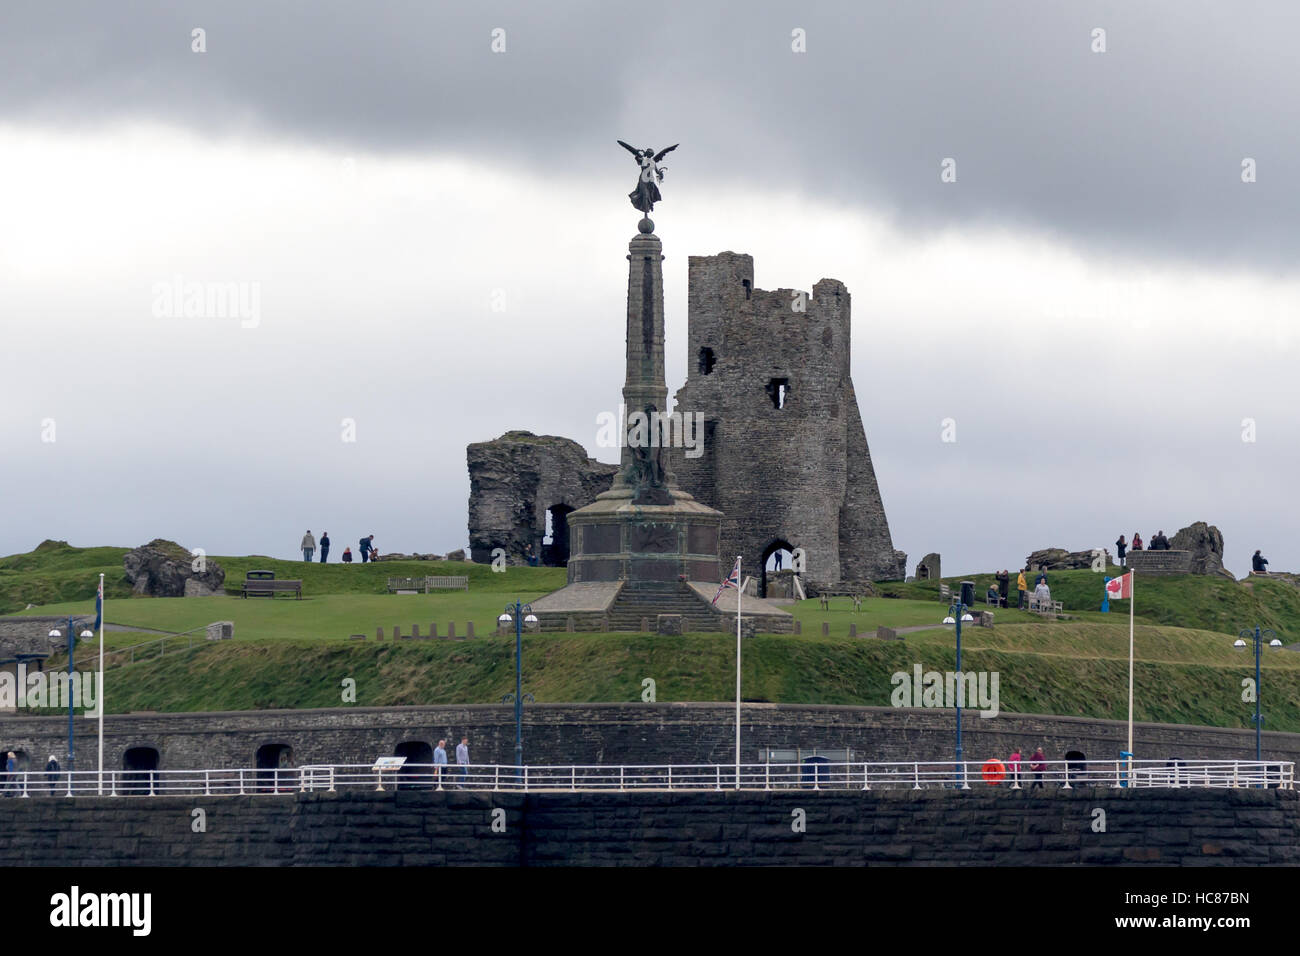 A view of Aberystwyth war memorial and castle ruins as seen from the seaside Stock Photo